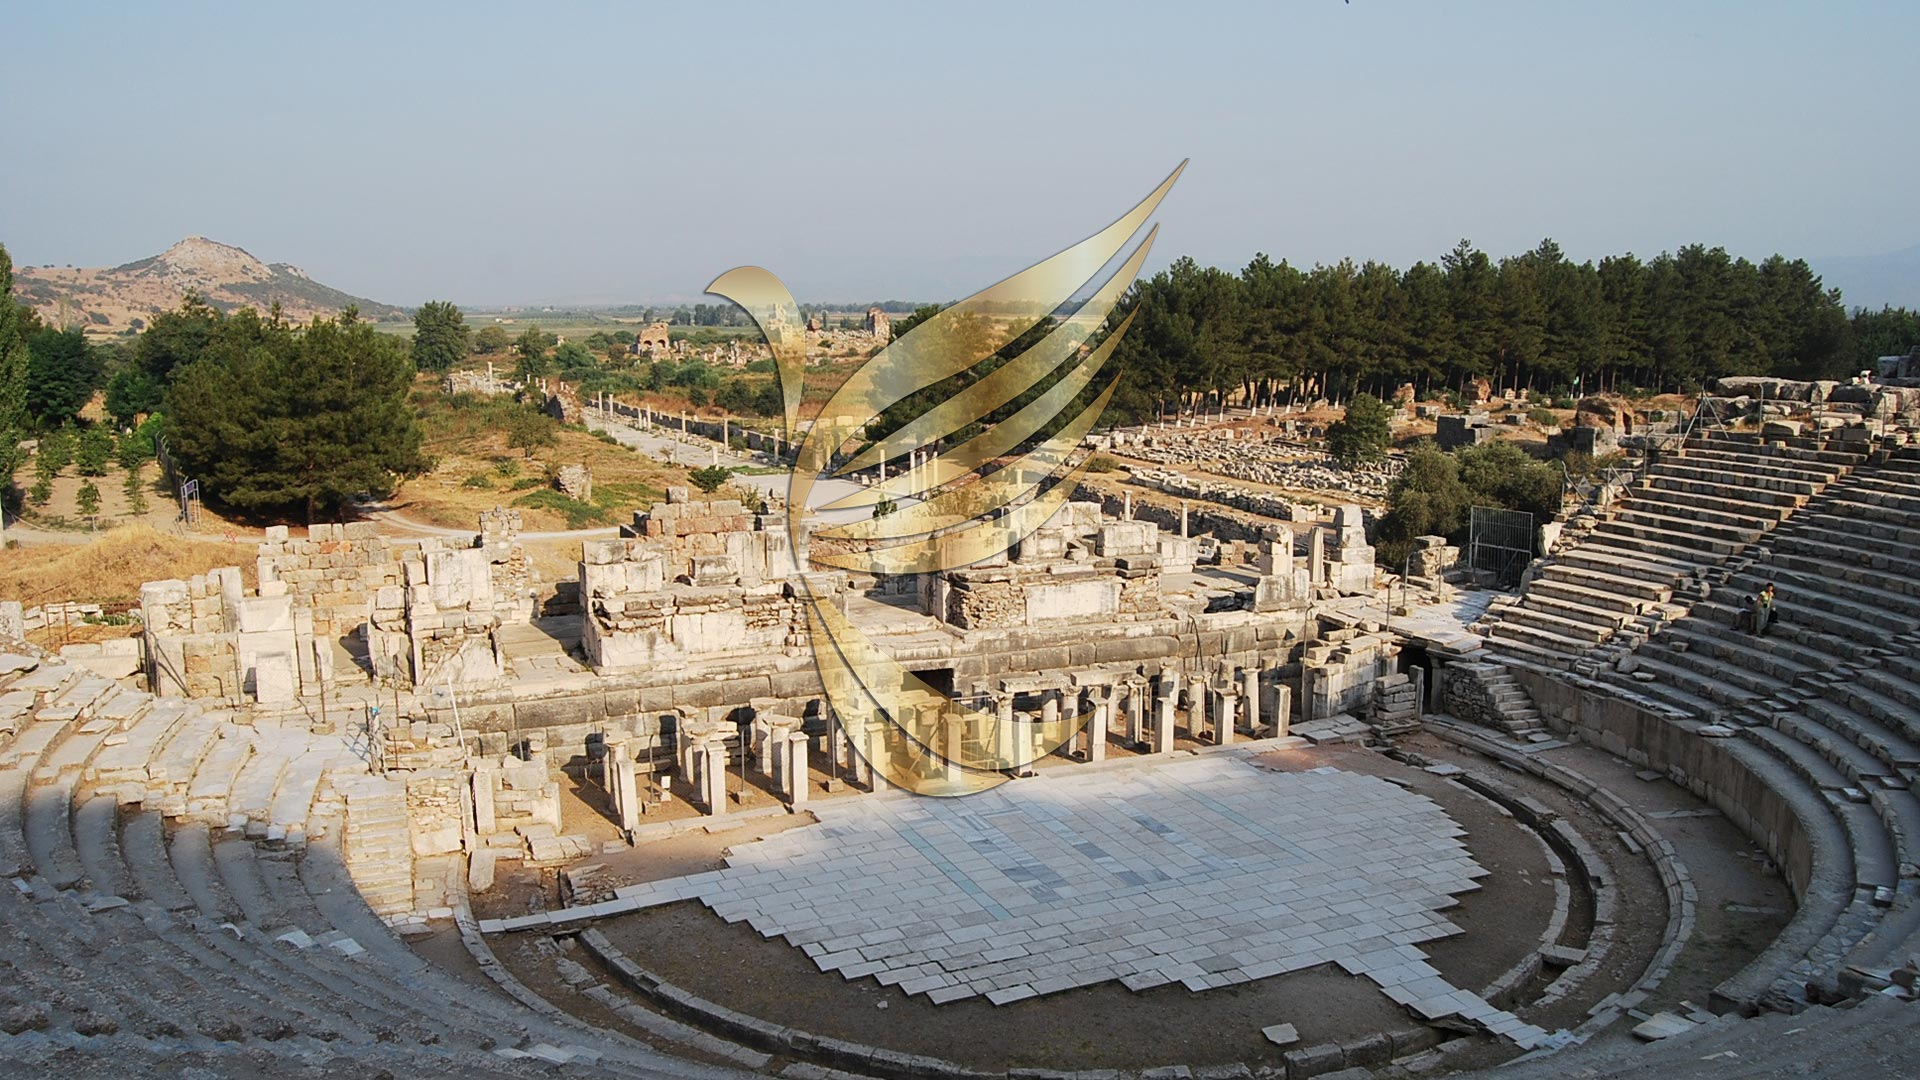 Ephesus Commercial Agora and Ancient Theater - Ancient City of Ephesus